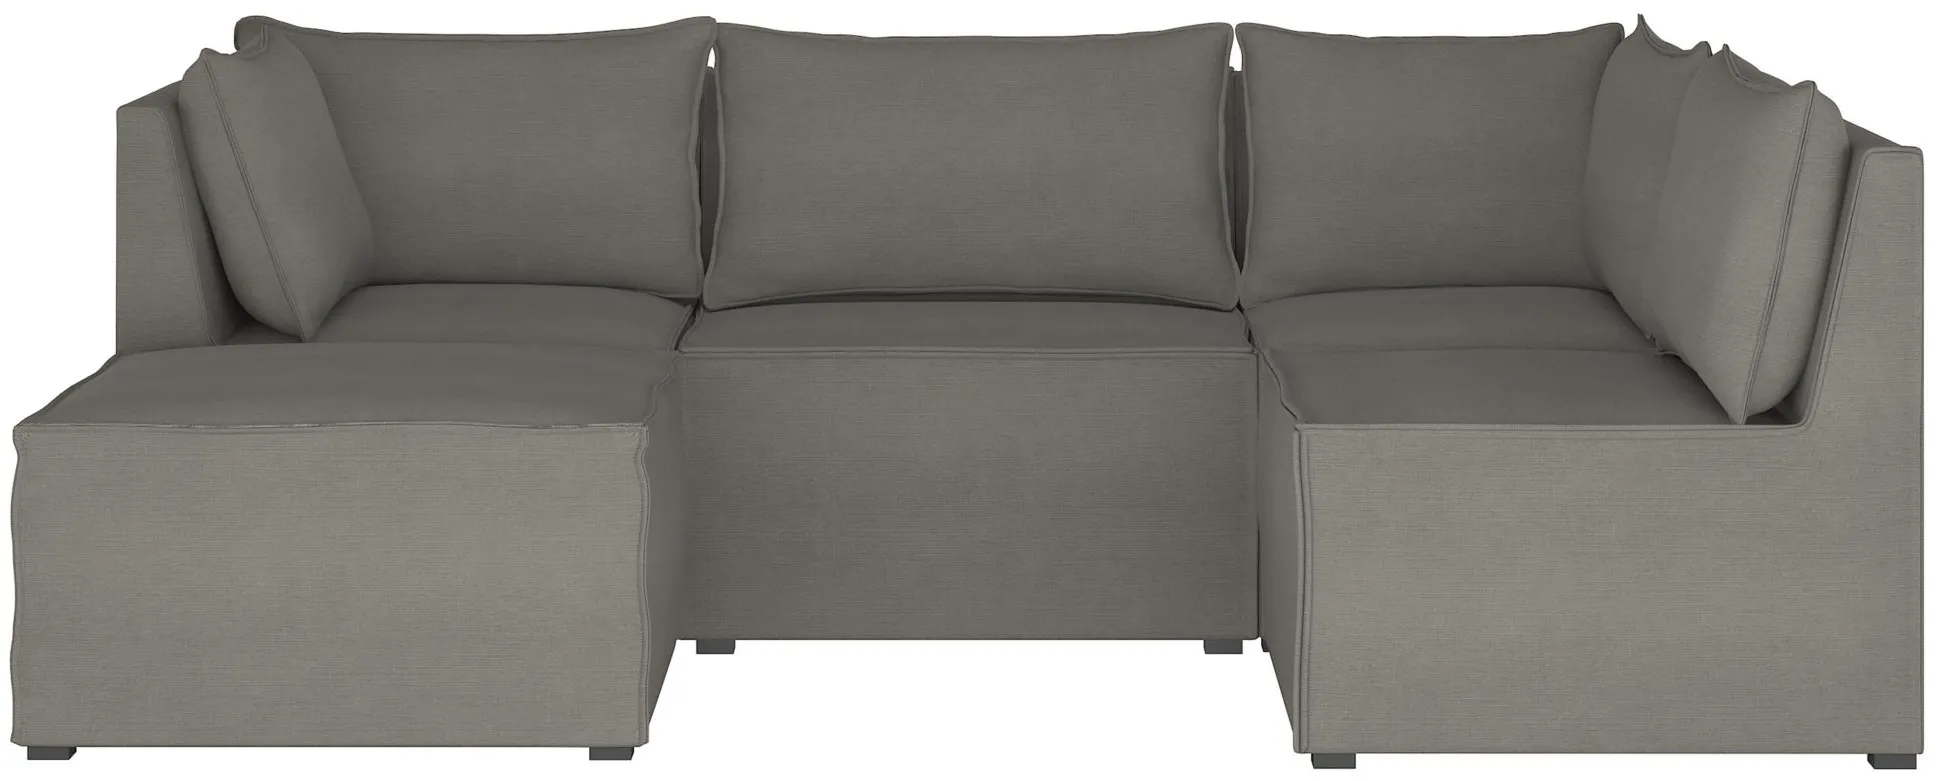 Stacy III 5-pc. Left Hand Facing Sectional Sofa in Linen Gray by Skyline